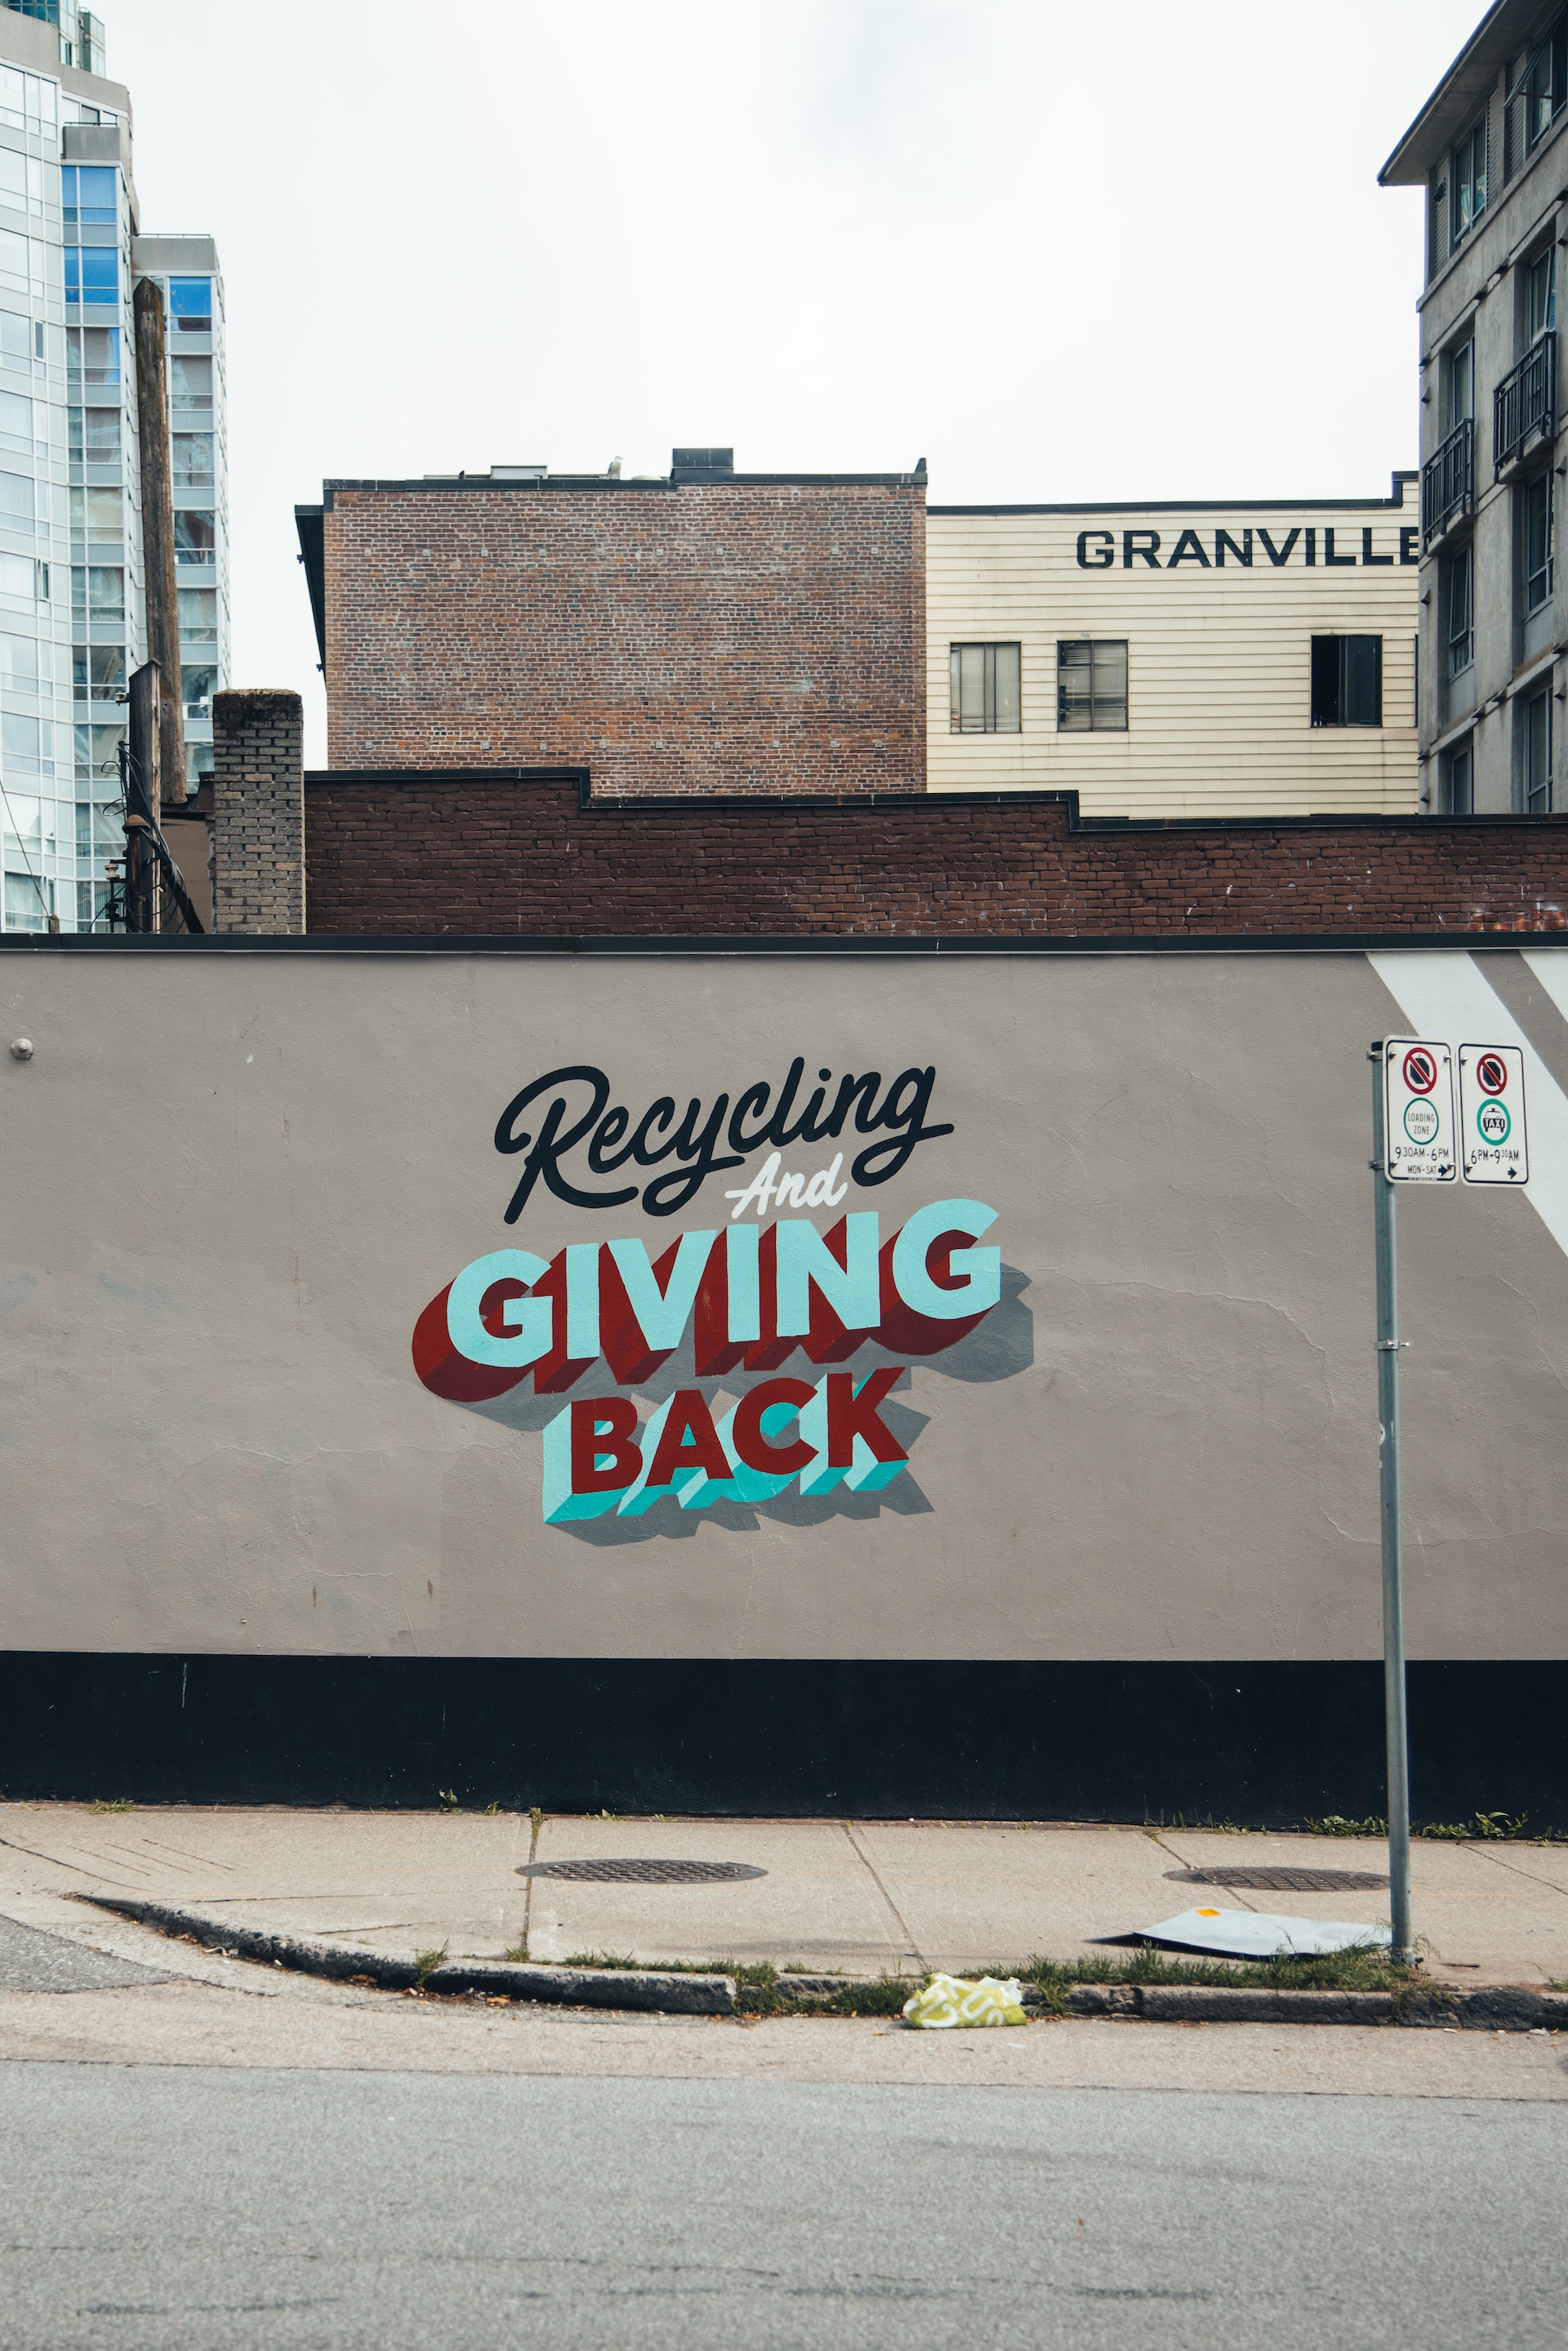 recycling and giving back graphic art on building